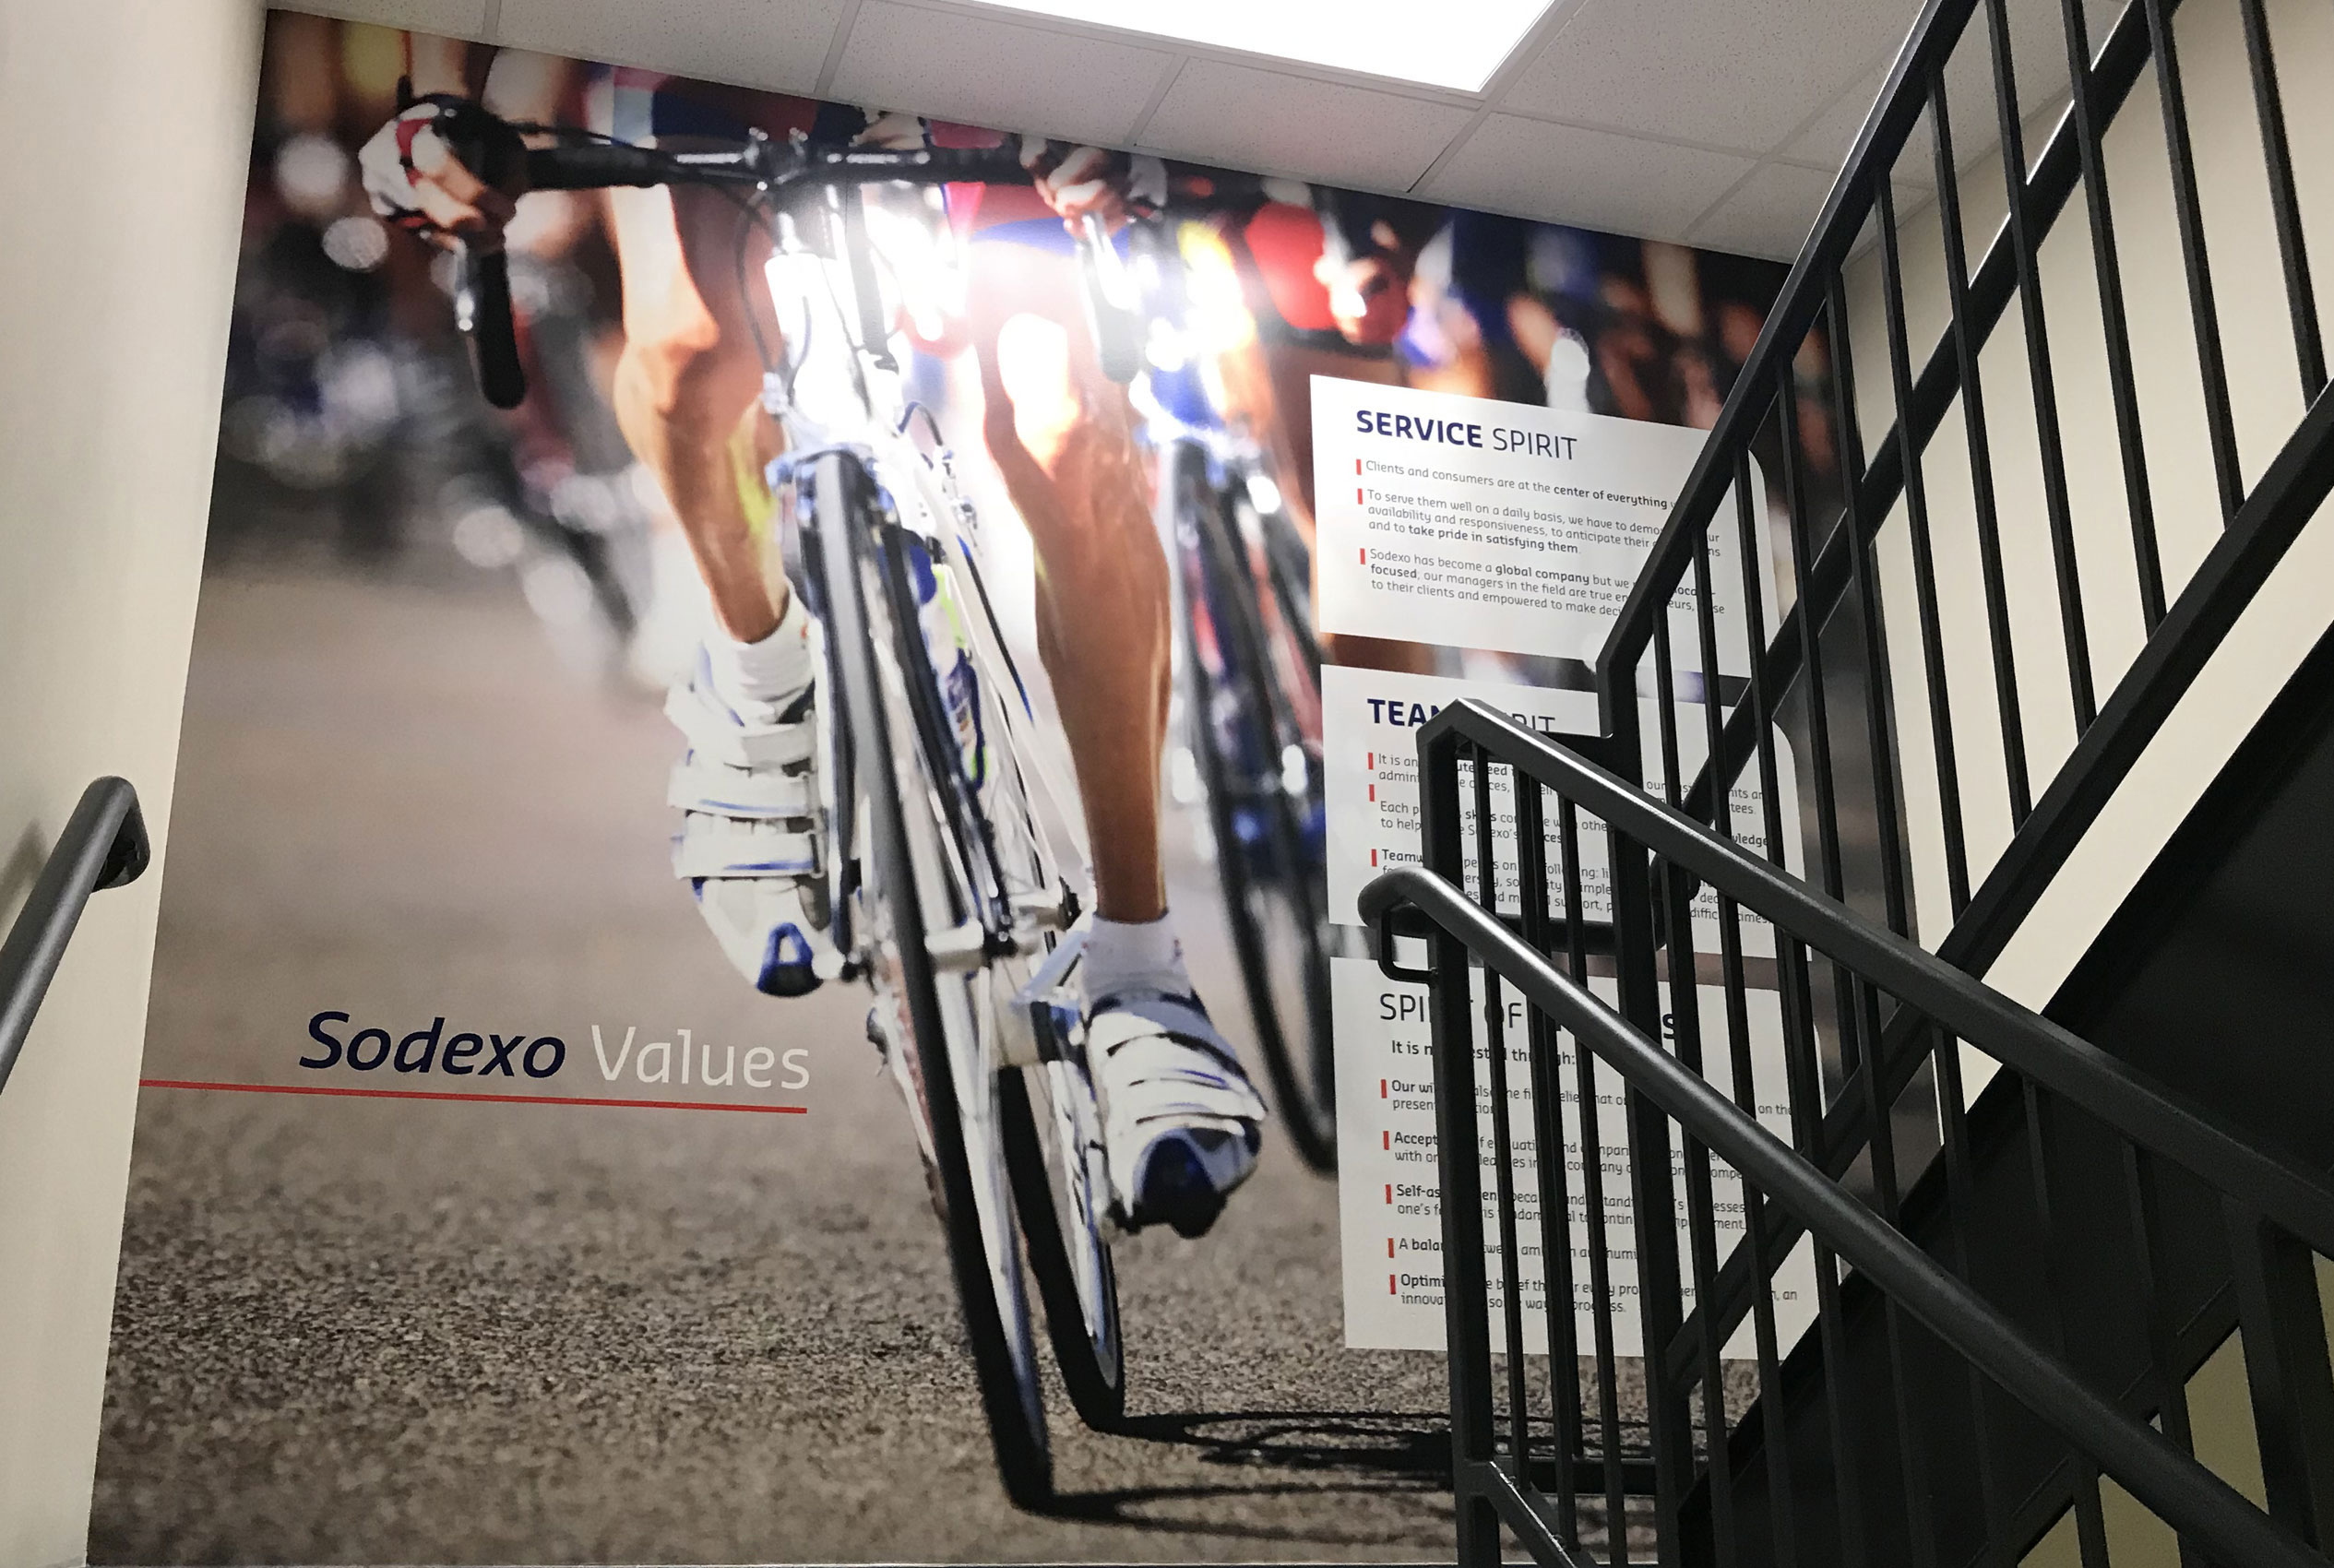 Large wall photo in stairwell of Tour de France cyclists